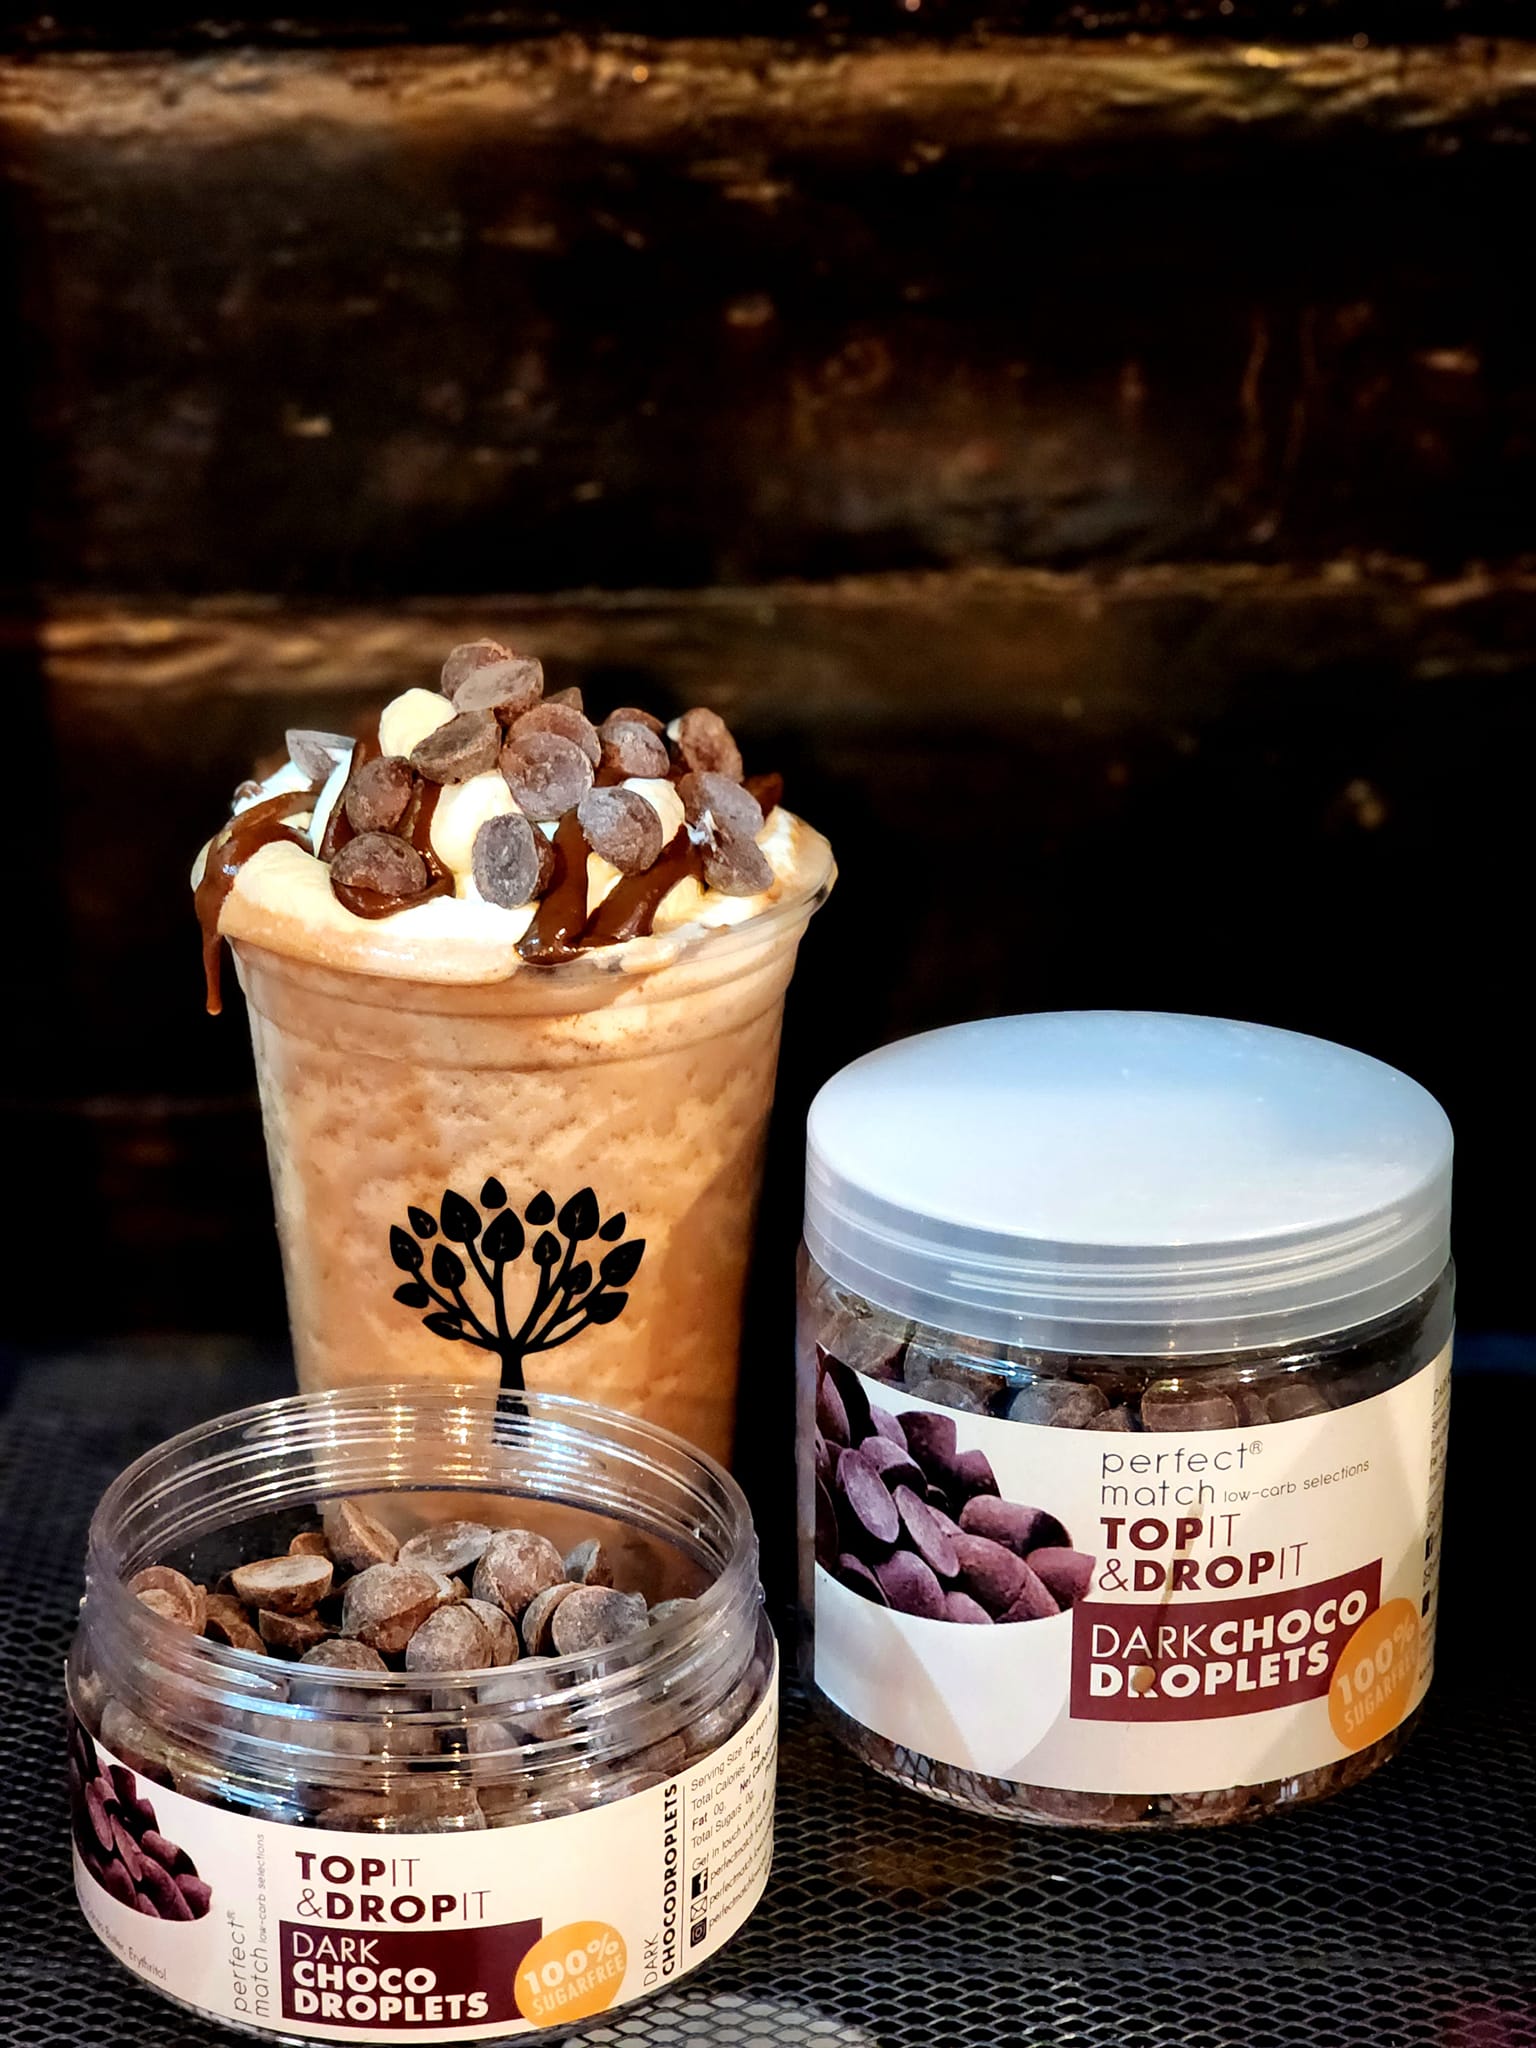 Perfectmatch Low-carb Dark Choco Droplets  is a Low-carb, Sugar-Free, Keto-Friendly, Diabetic-Friendly Chocolate droplet best for smoothies, baking or simply for snacking and made low-carb. Created by Low-carb practitioners and enthusiasts, Perfectmatch Low-carb Selections is a trusted brand in the Low-carb and Keto community.